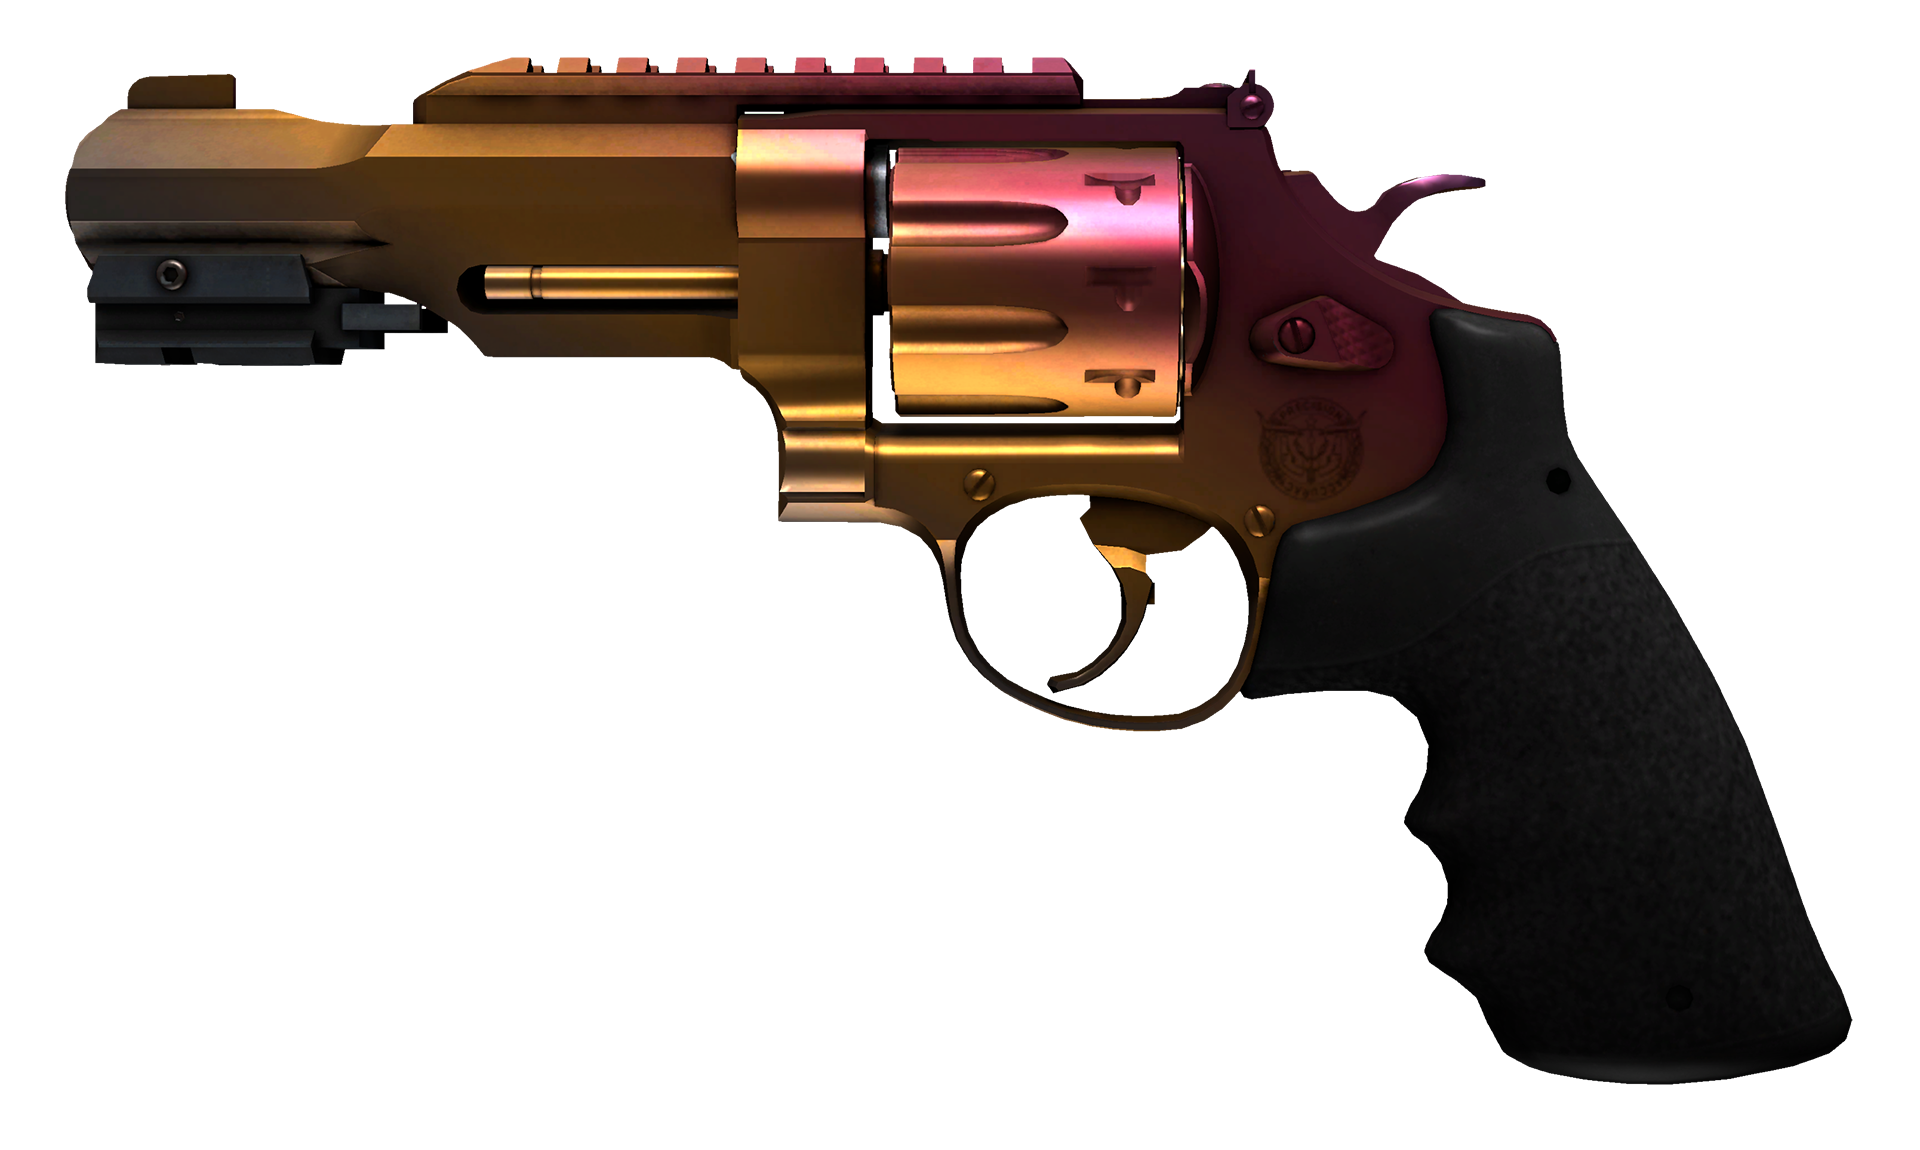 R8 Revolver Canal Spray cs go skin download the last version for windows